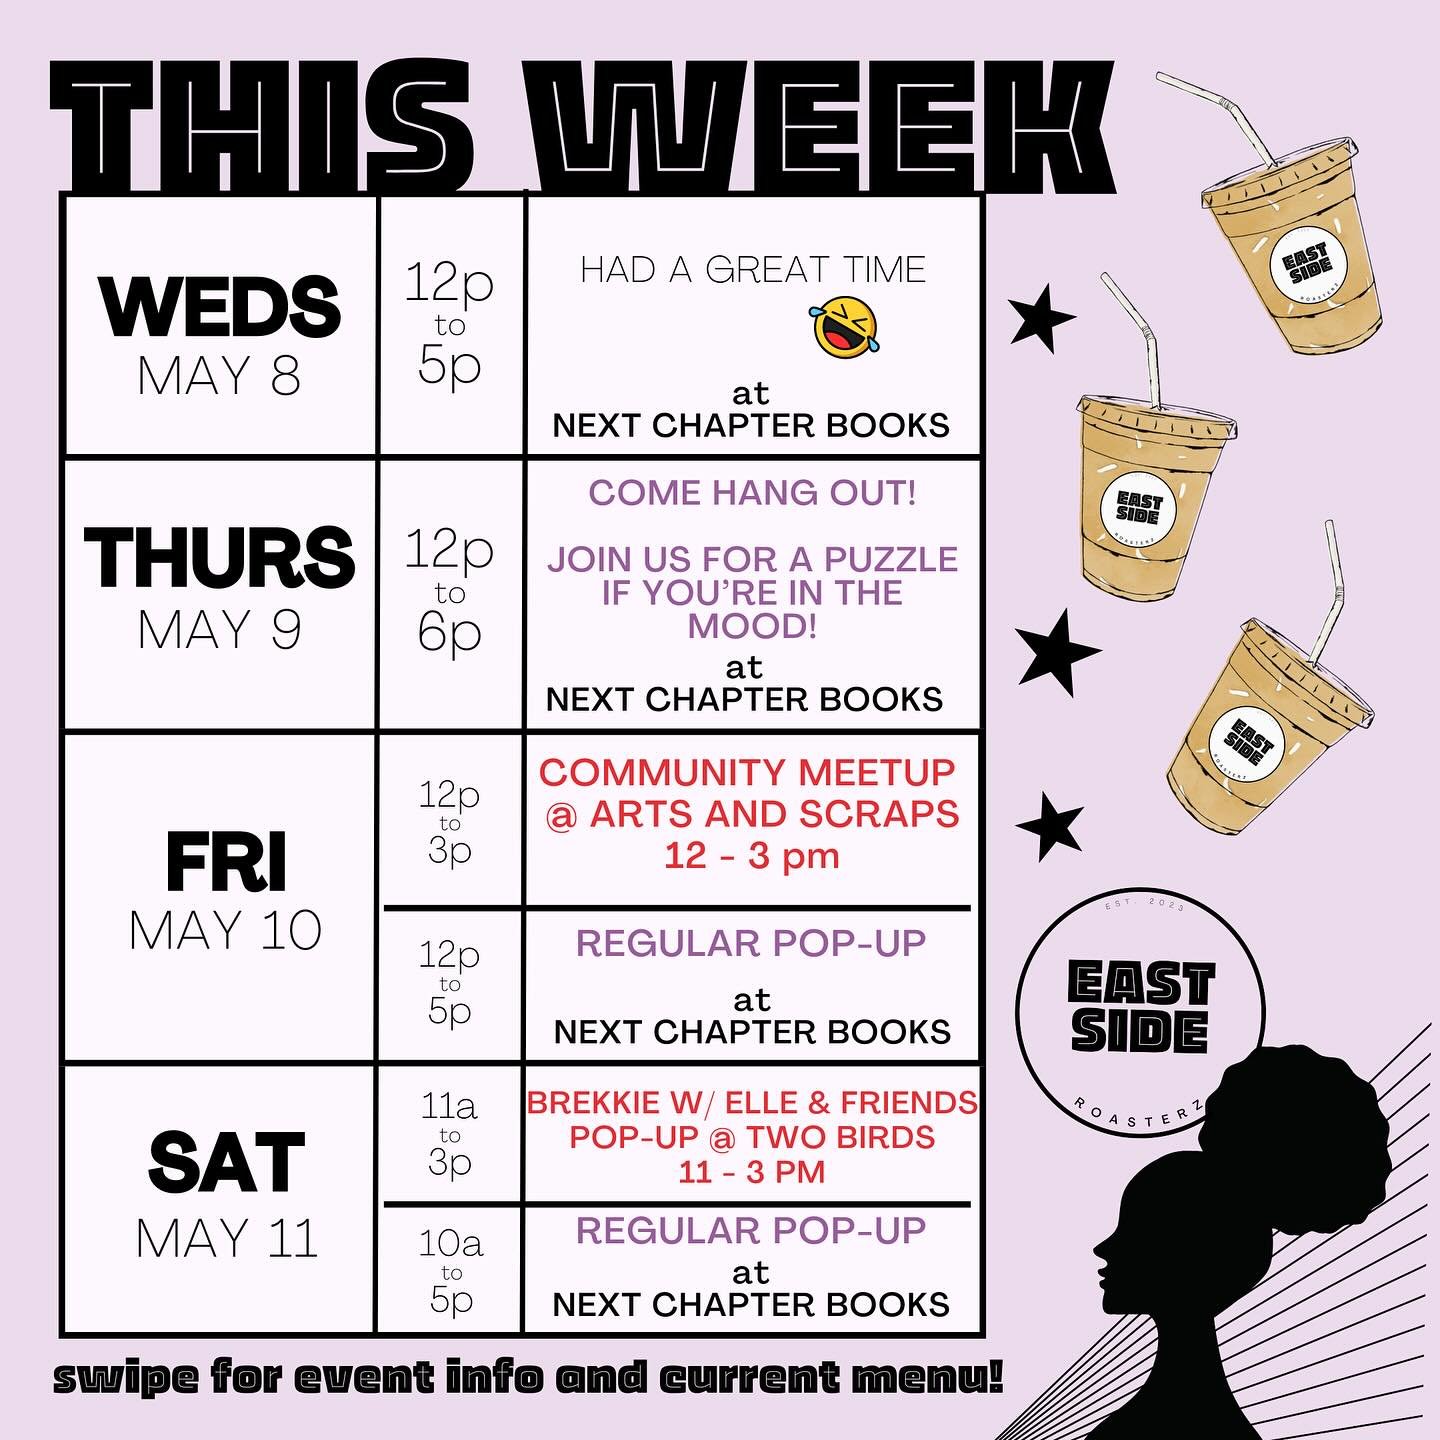 Ooop&mdash; here&rsquo;s this week&rsquo;s schedule!! 😅

In addition to our regular pop-ups at @nextchapterbooksdetroit we also have TWO community pop-ups this week! Read on or swipe for info on everything 😇

🎨 Friday we are also at @artsandscraps